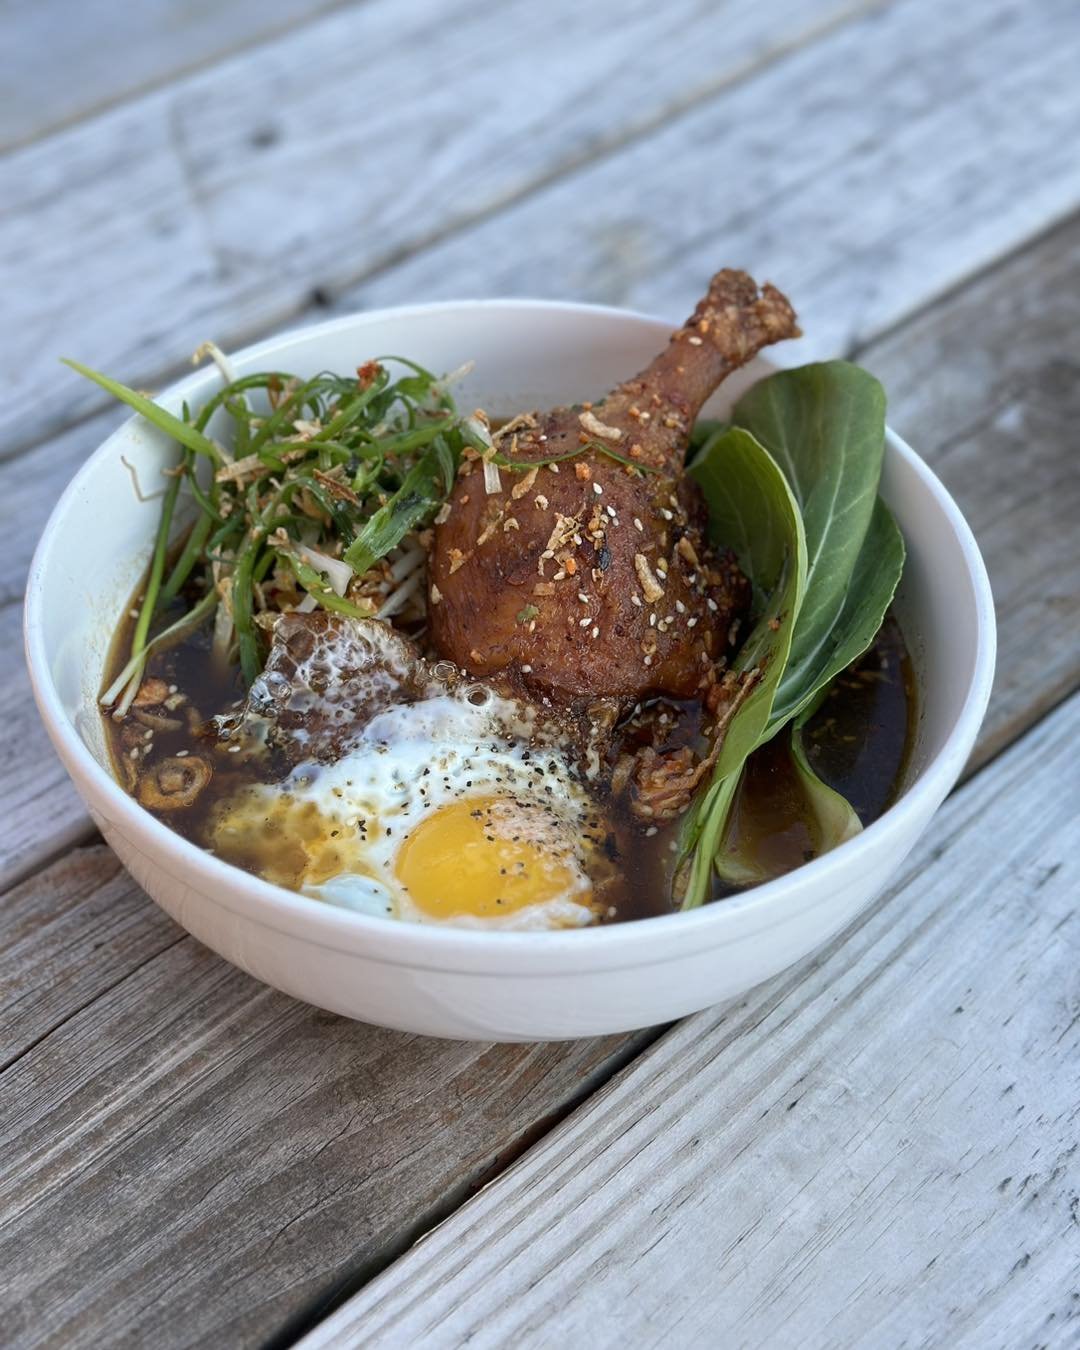 Another rainy day? 
No worries, spice things up with the Duck Ramen 😋🤤for dinner. A delightful blend of Asian and Caribbean flavors. 🌶️🌶️🌶️🌶️🌶️(spice level 5/10)
Available for dine in or take out.
Call (276)-285-2202 to place your order or mak